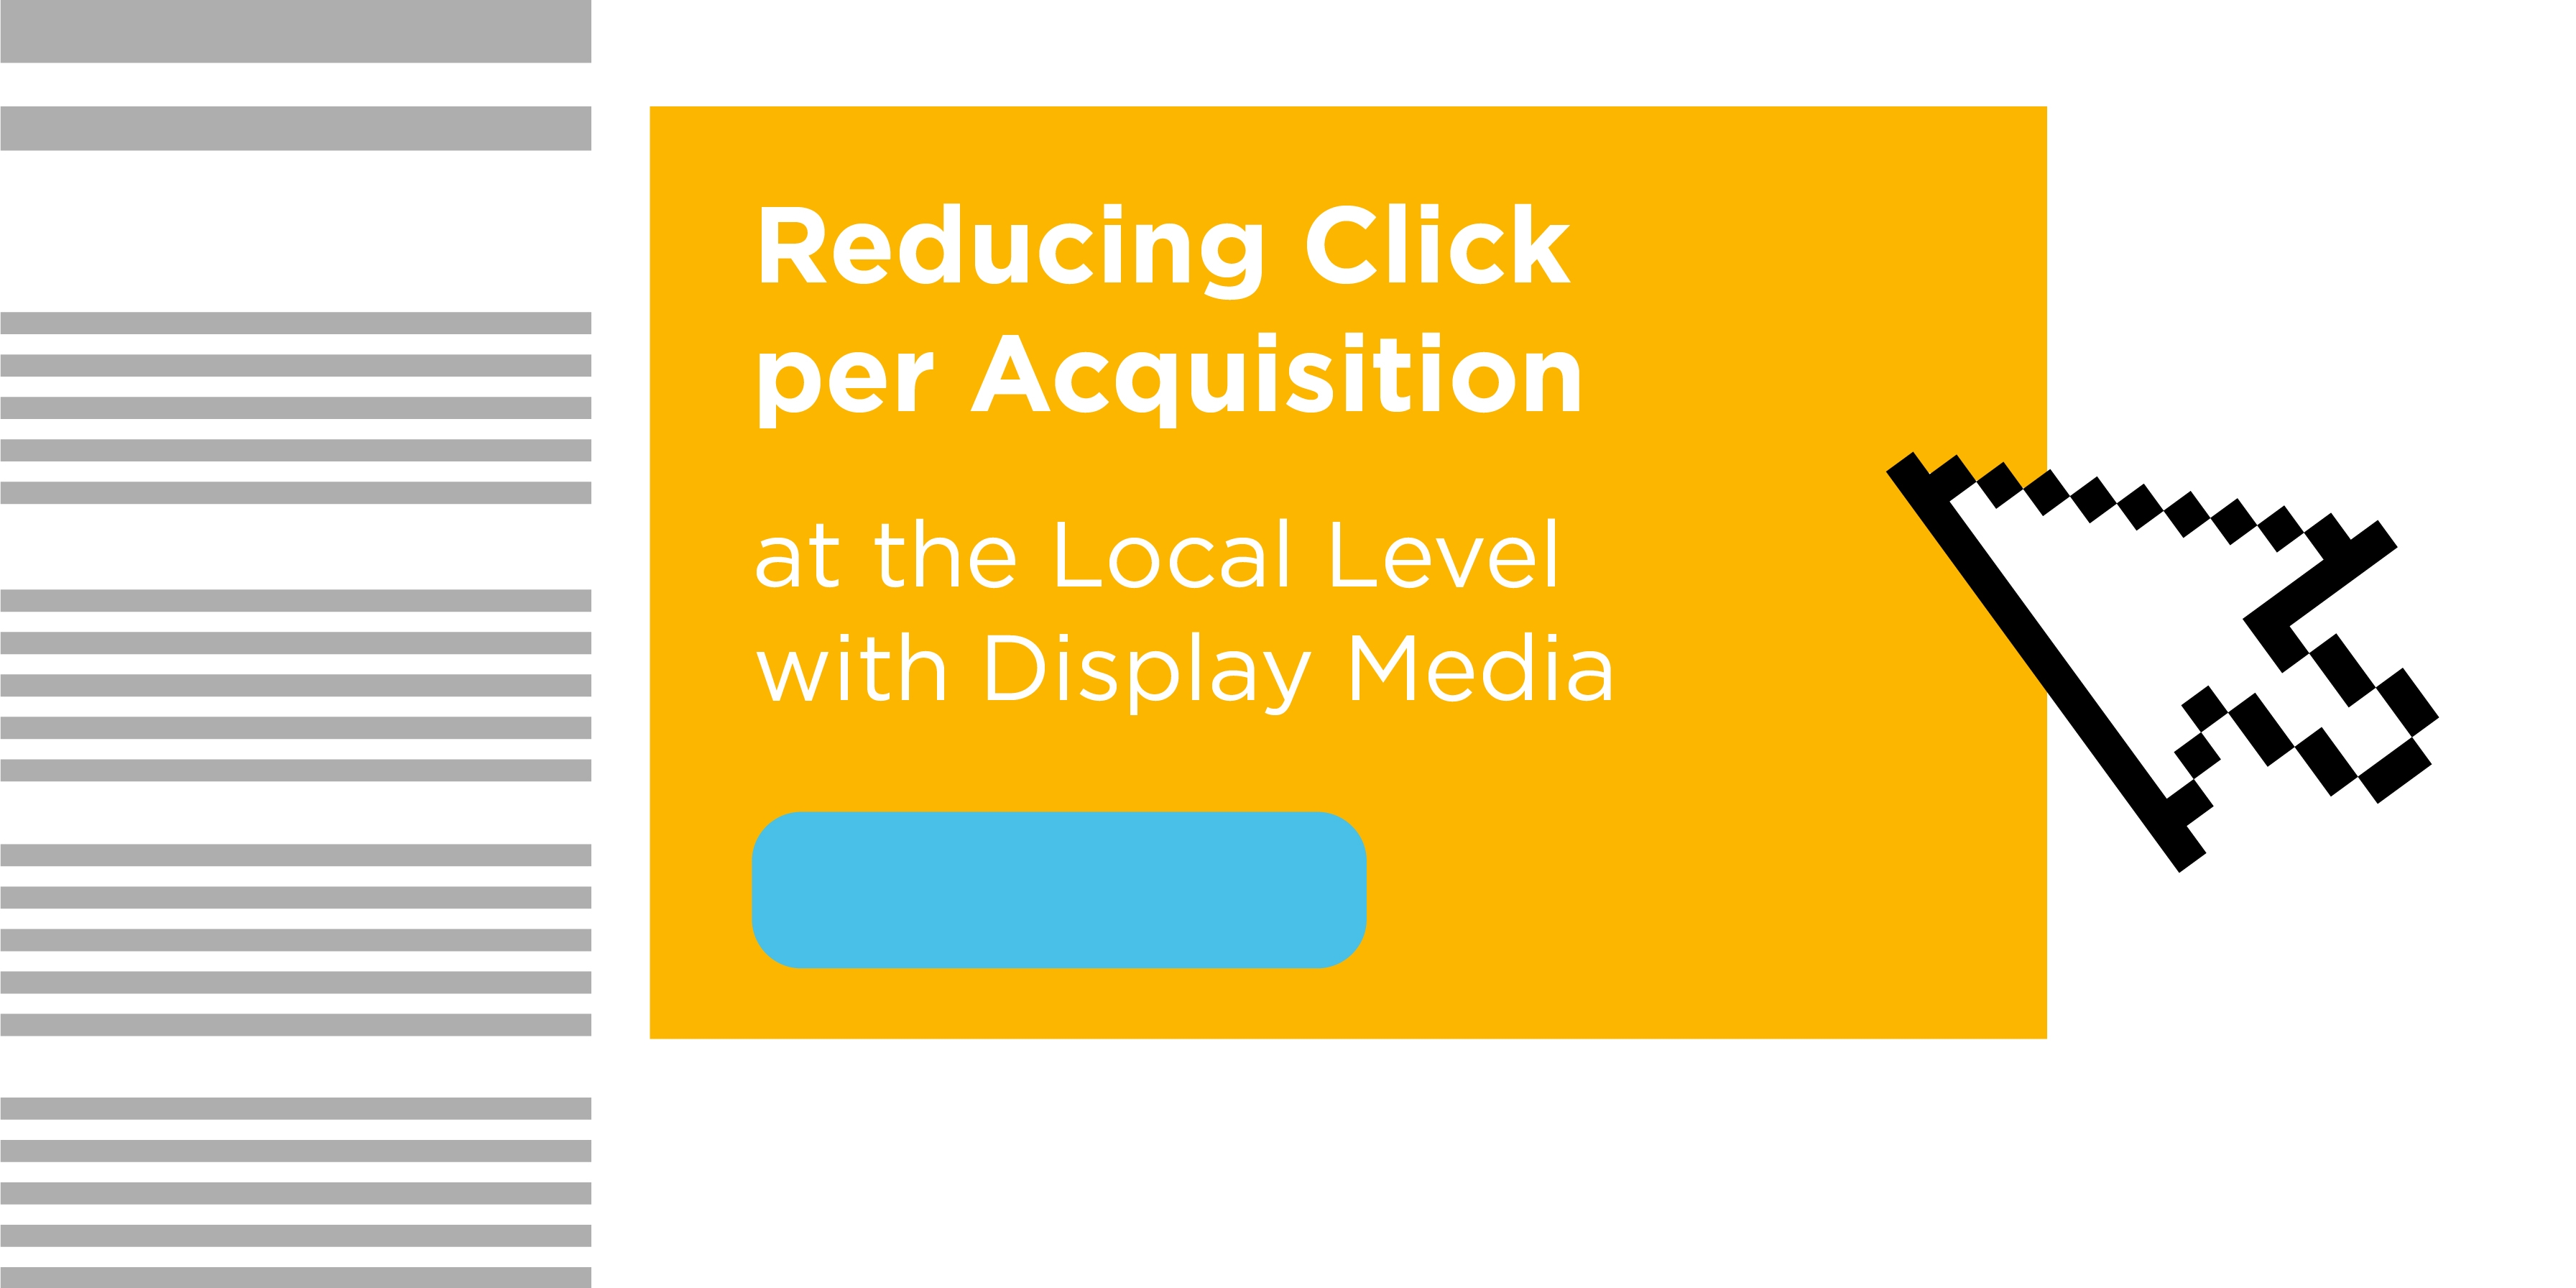 Reducing CPA at the Local Level with Display Media